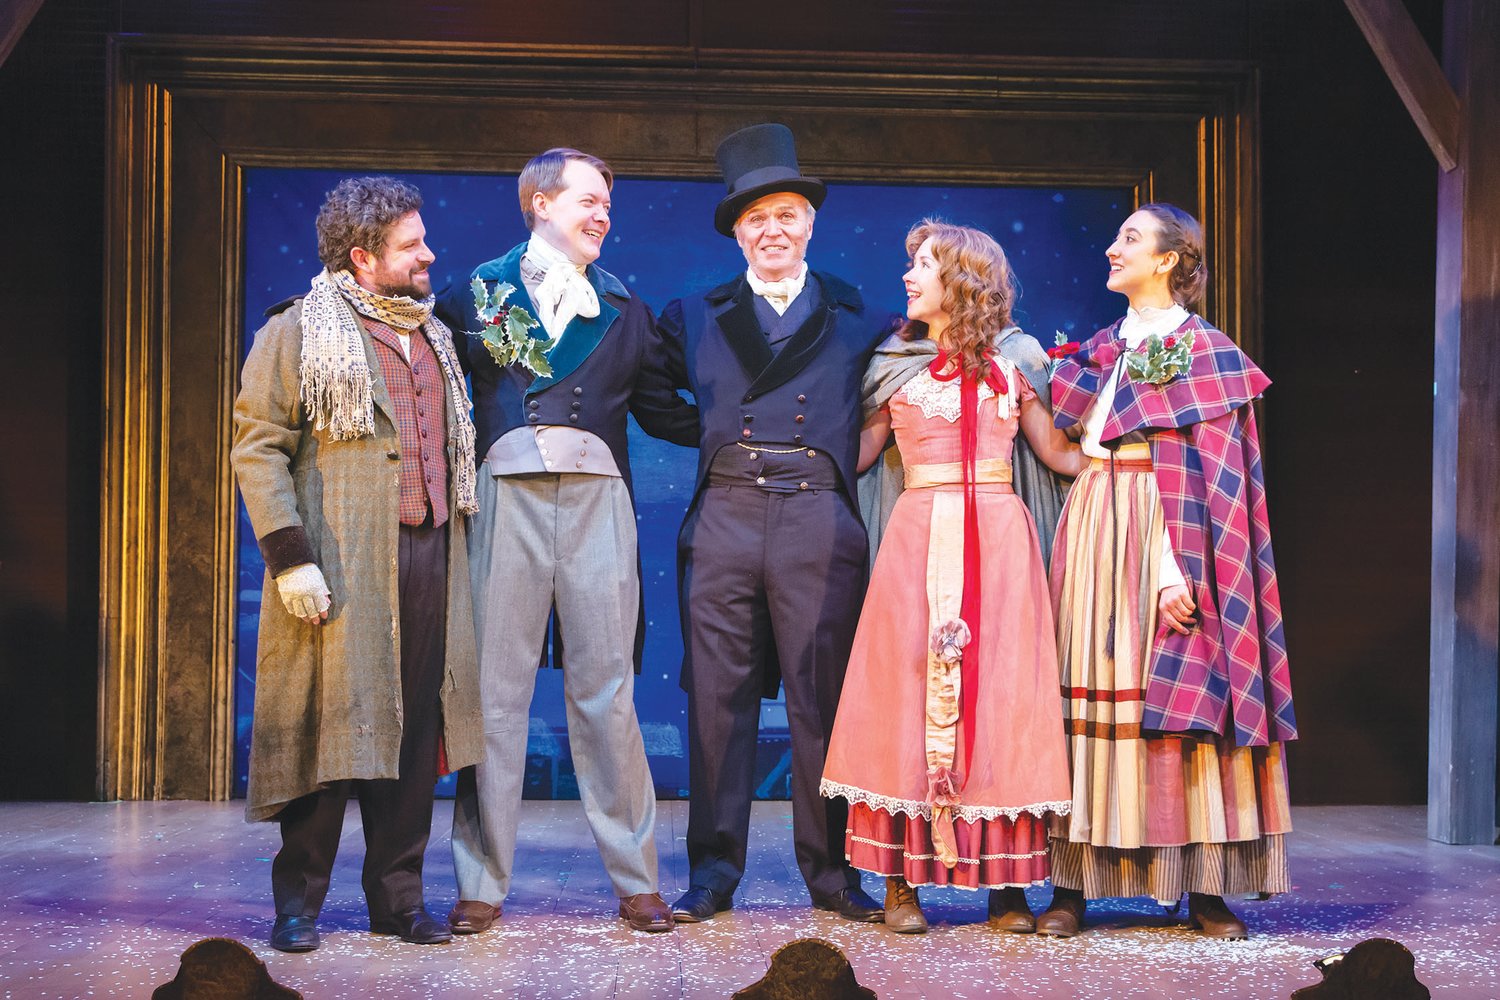 From left, Patrick Halley, Chris French, Wynn Harmon, Caitlin Clouthier and Gabi Van Horn on stage in White Heron Theatre’s “A Nantucket Christmas Carol.”